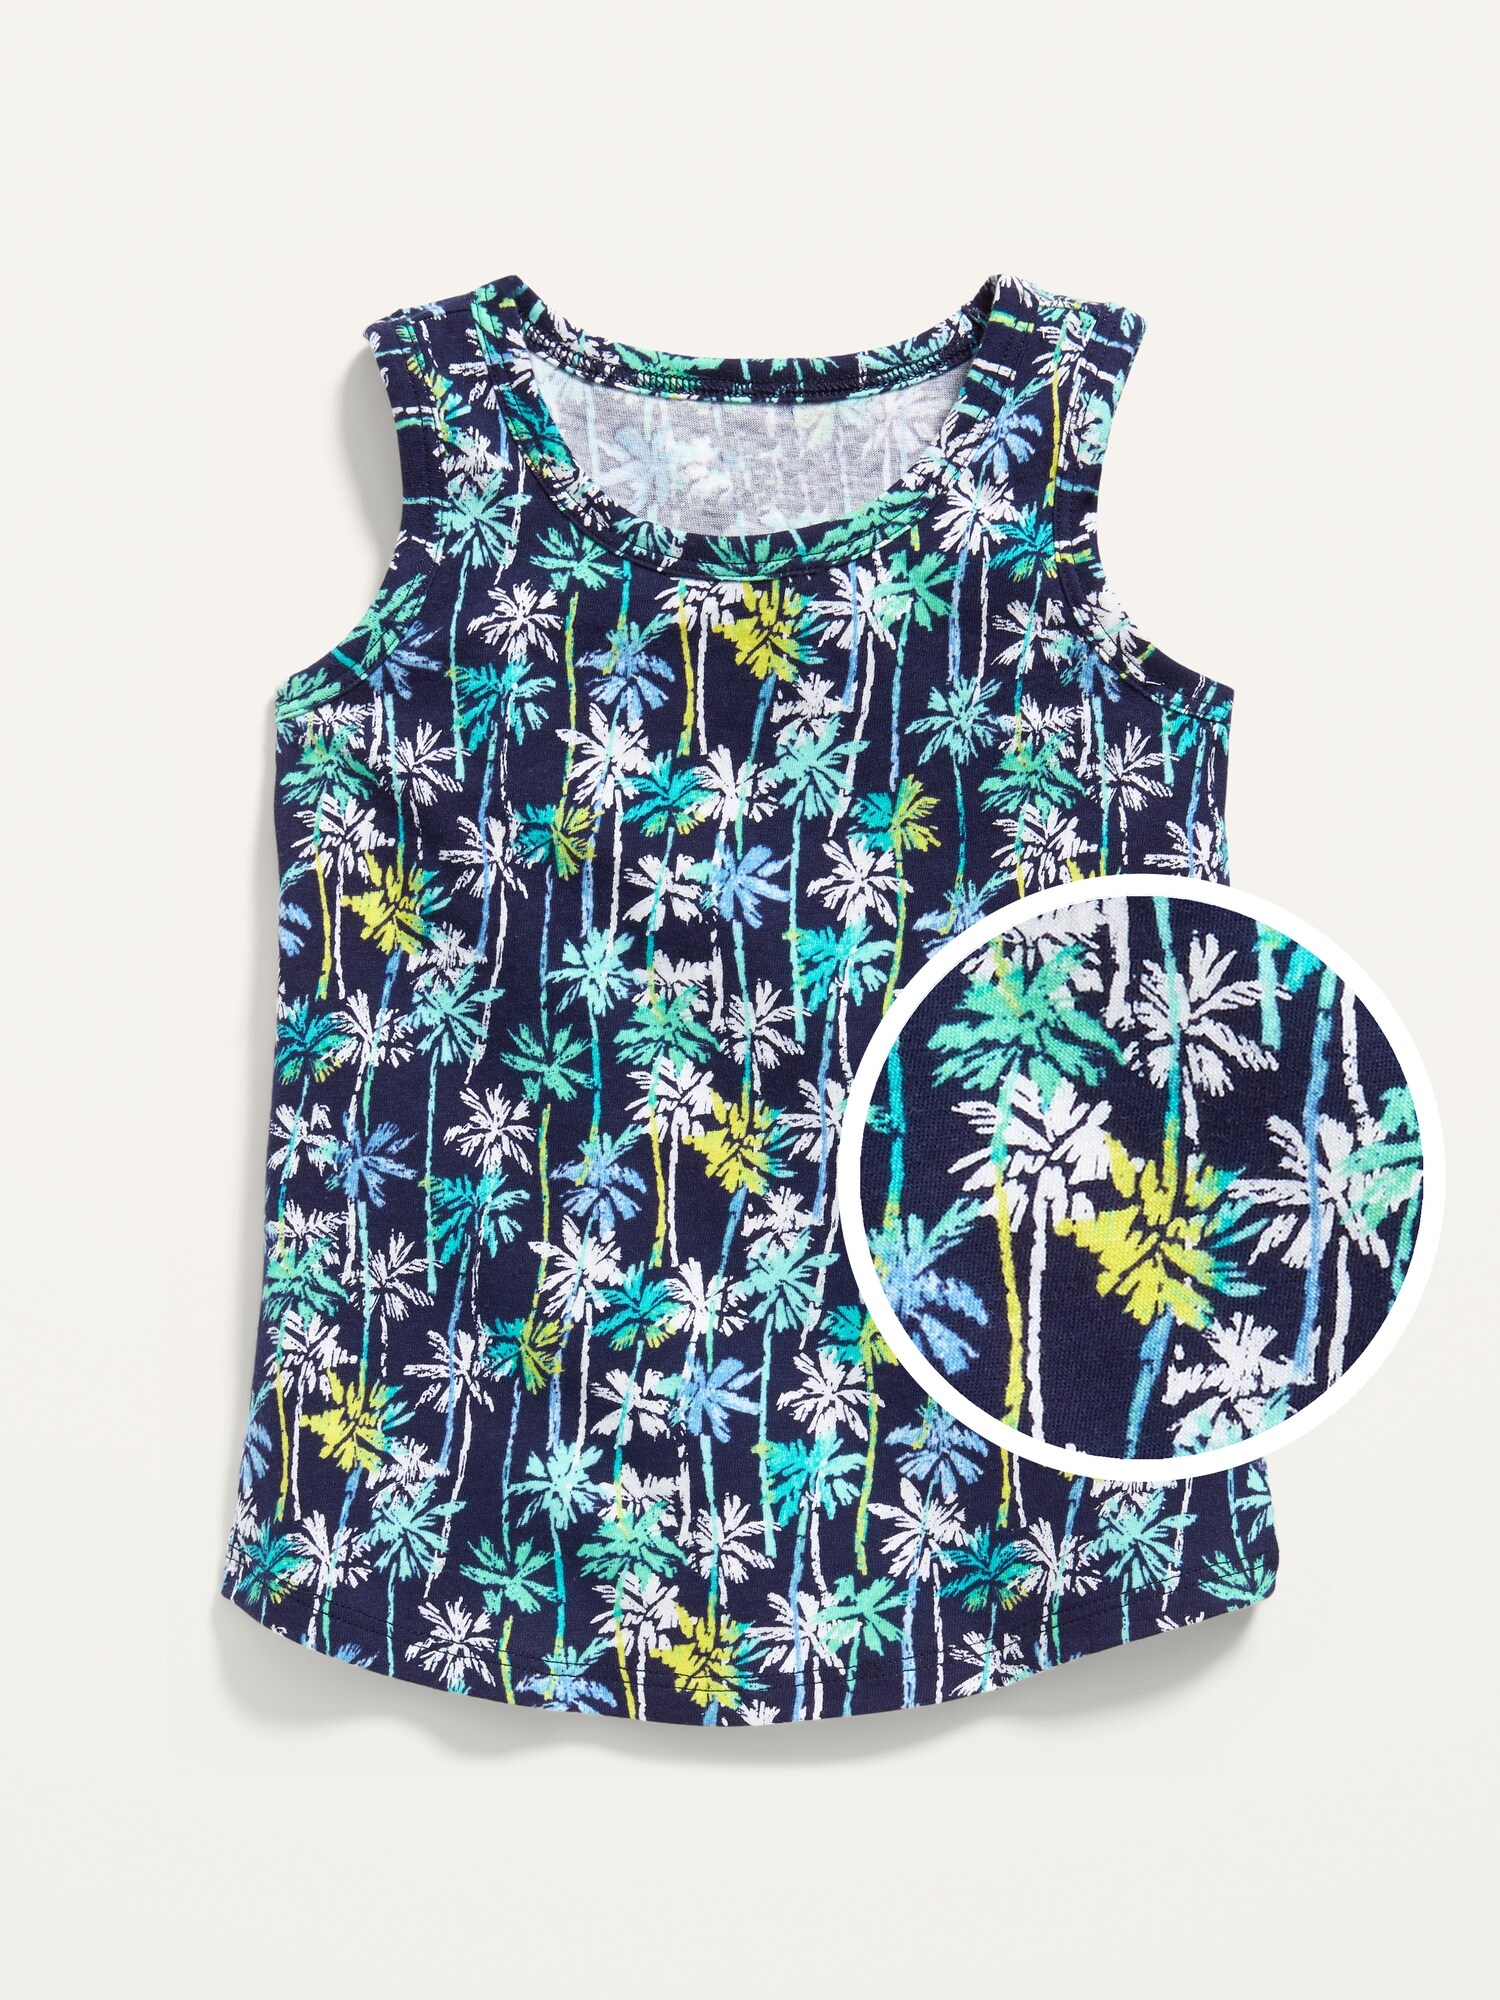 Unisex Printed Tank Top for Toddler